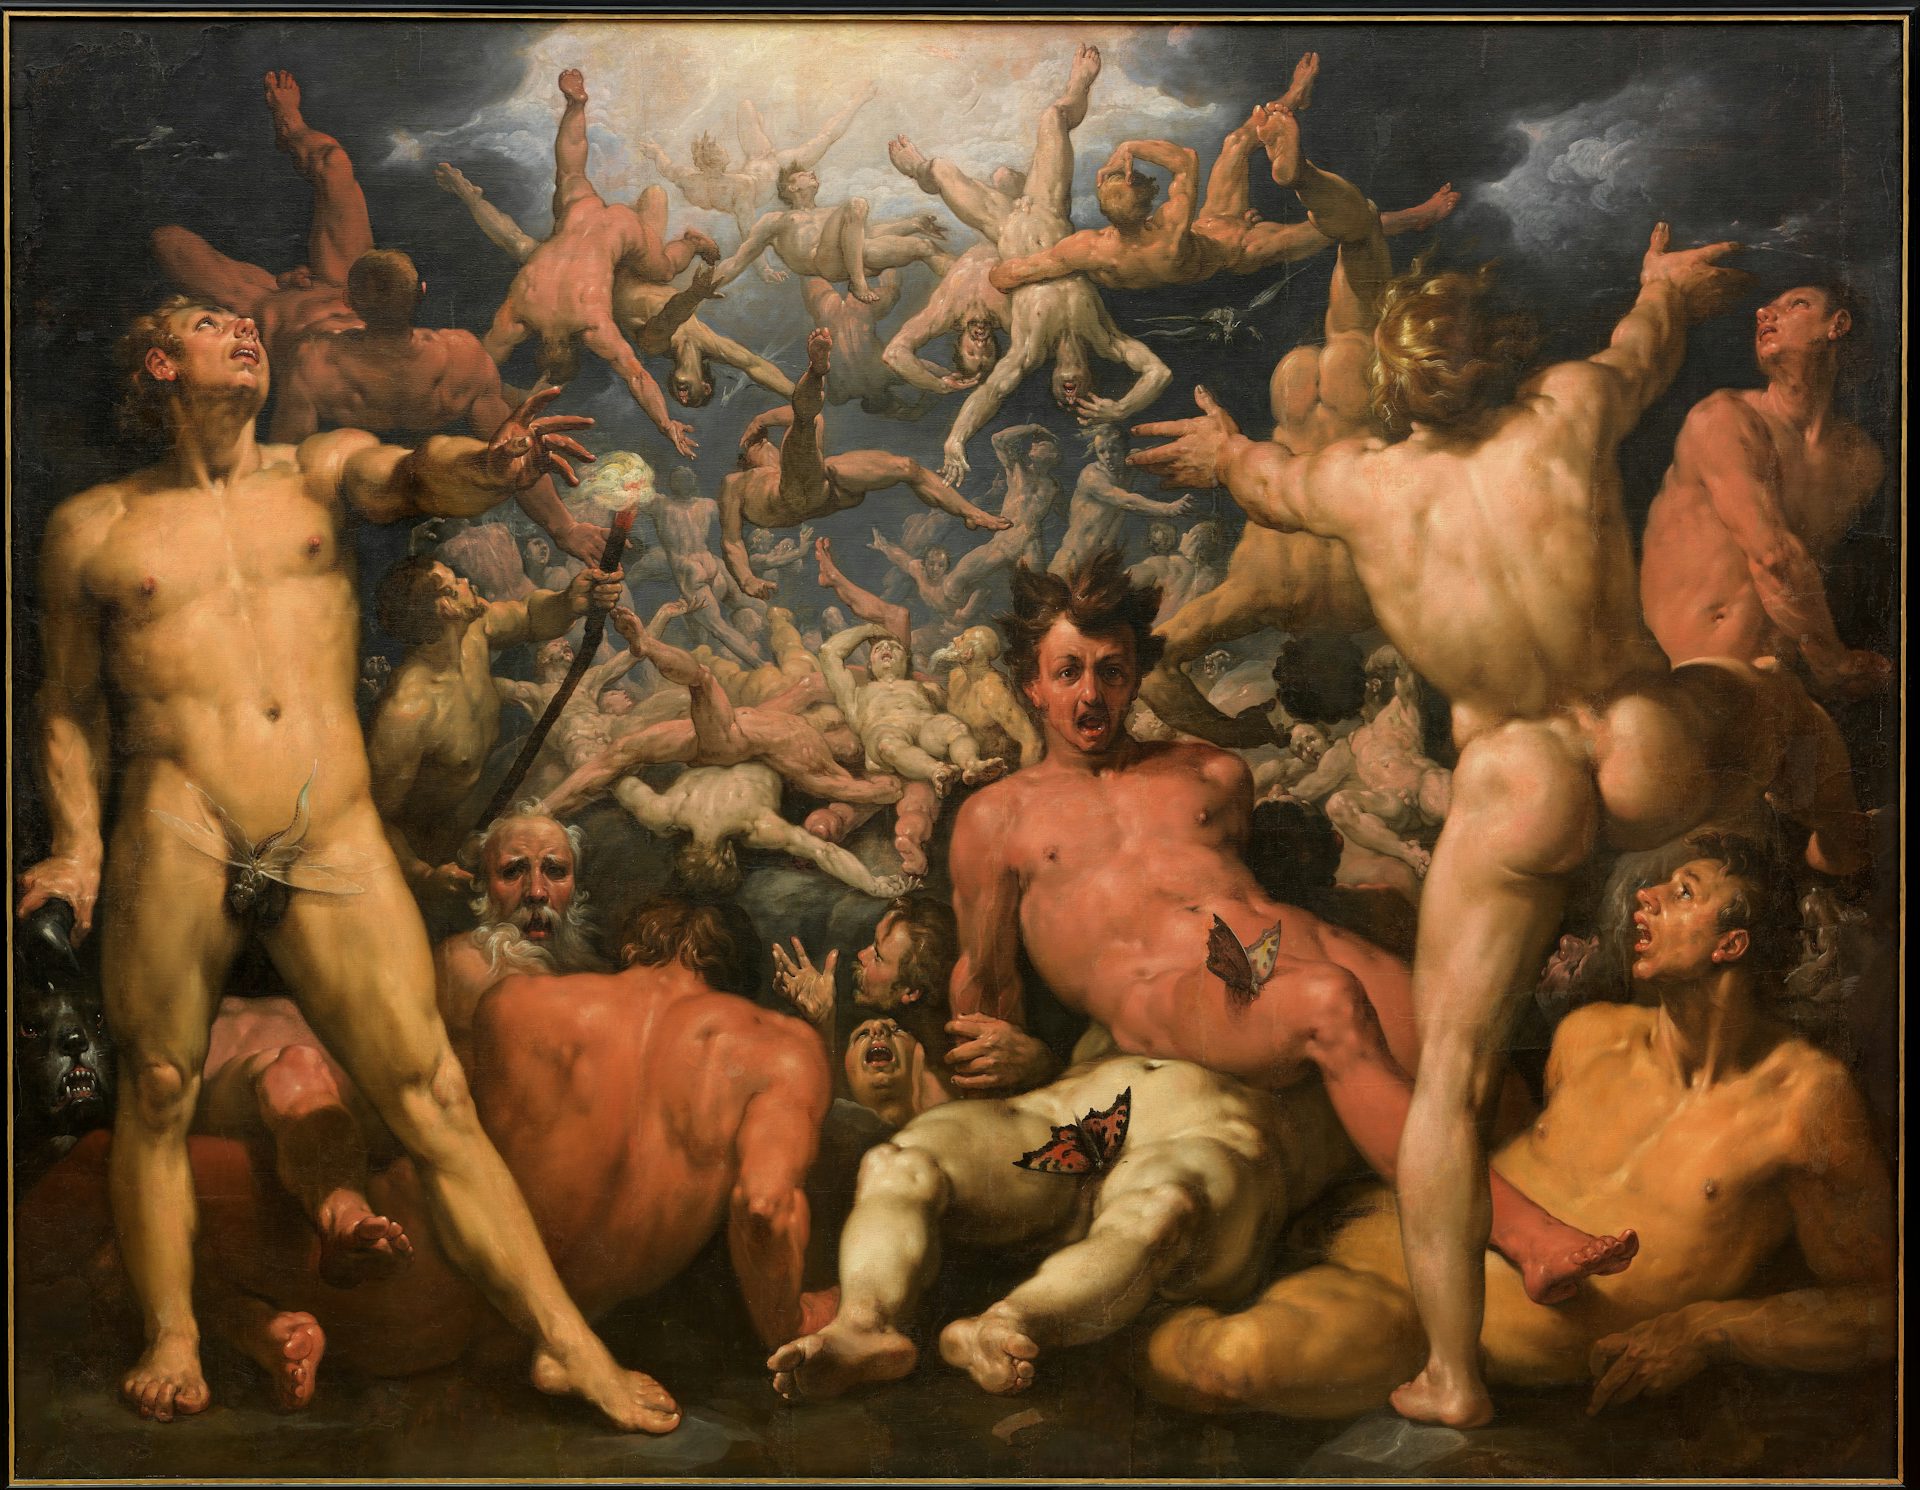 The Fall of the Titans by Cornelis van Haarlem